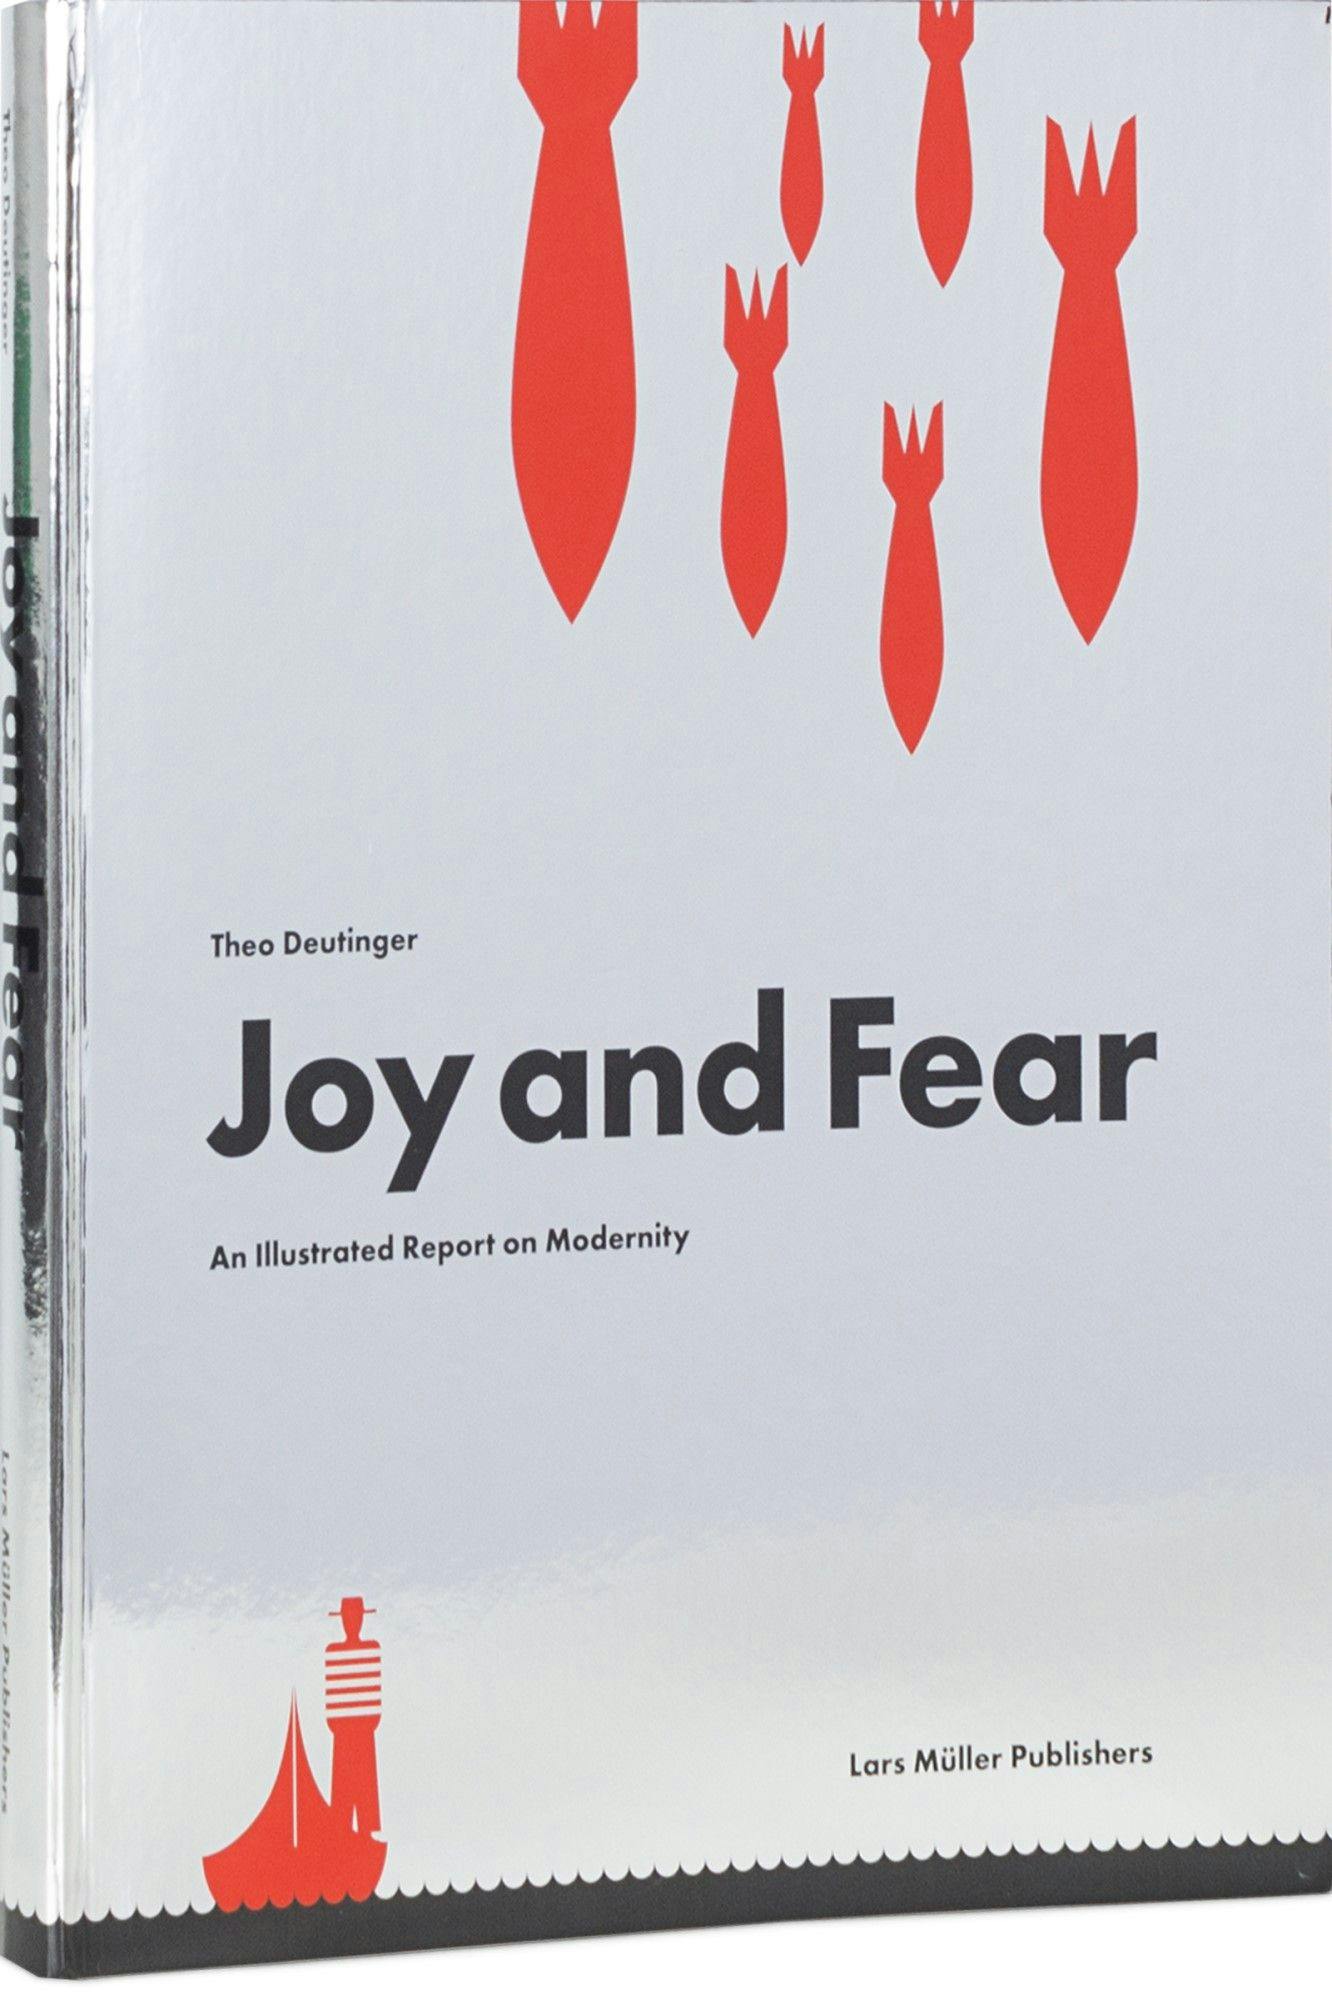 Book cover of the book Joy and Fear, mostly silver cover with some small red figures.